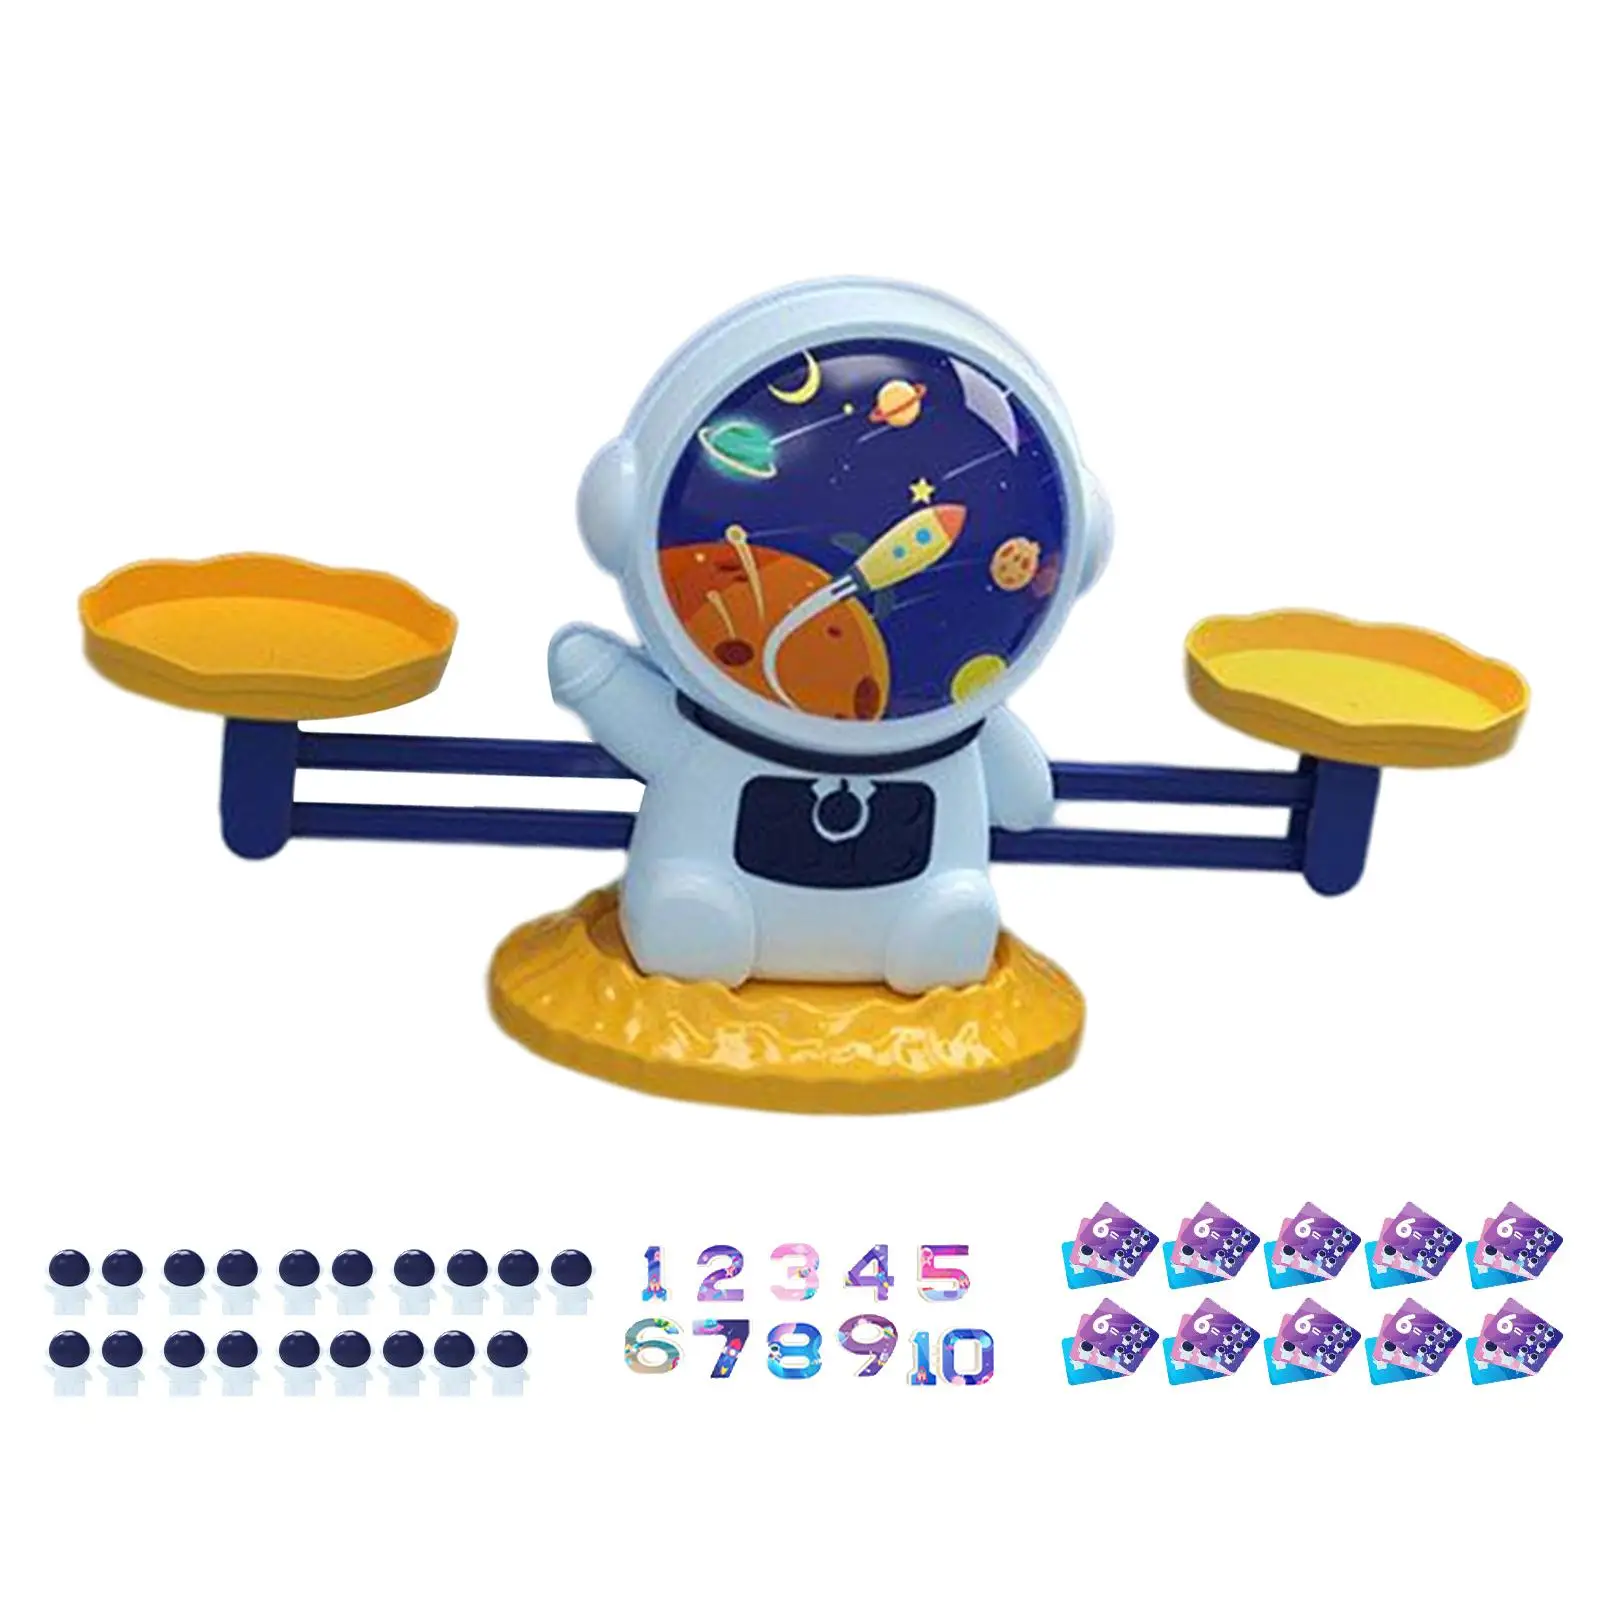 Balance Math Game Learning Activities Educational Toys Preschool Balance Scale Number Board Game for boys Kids